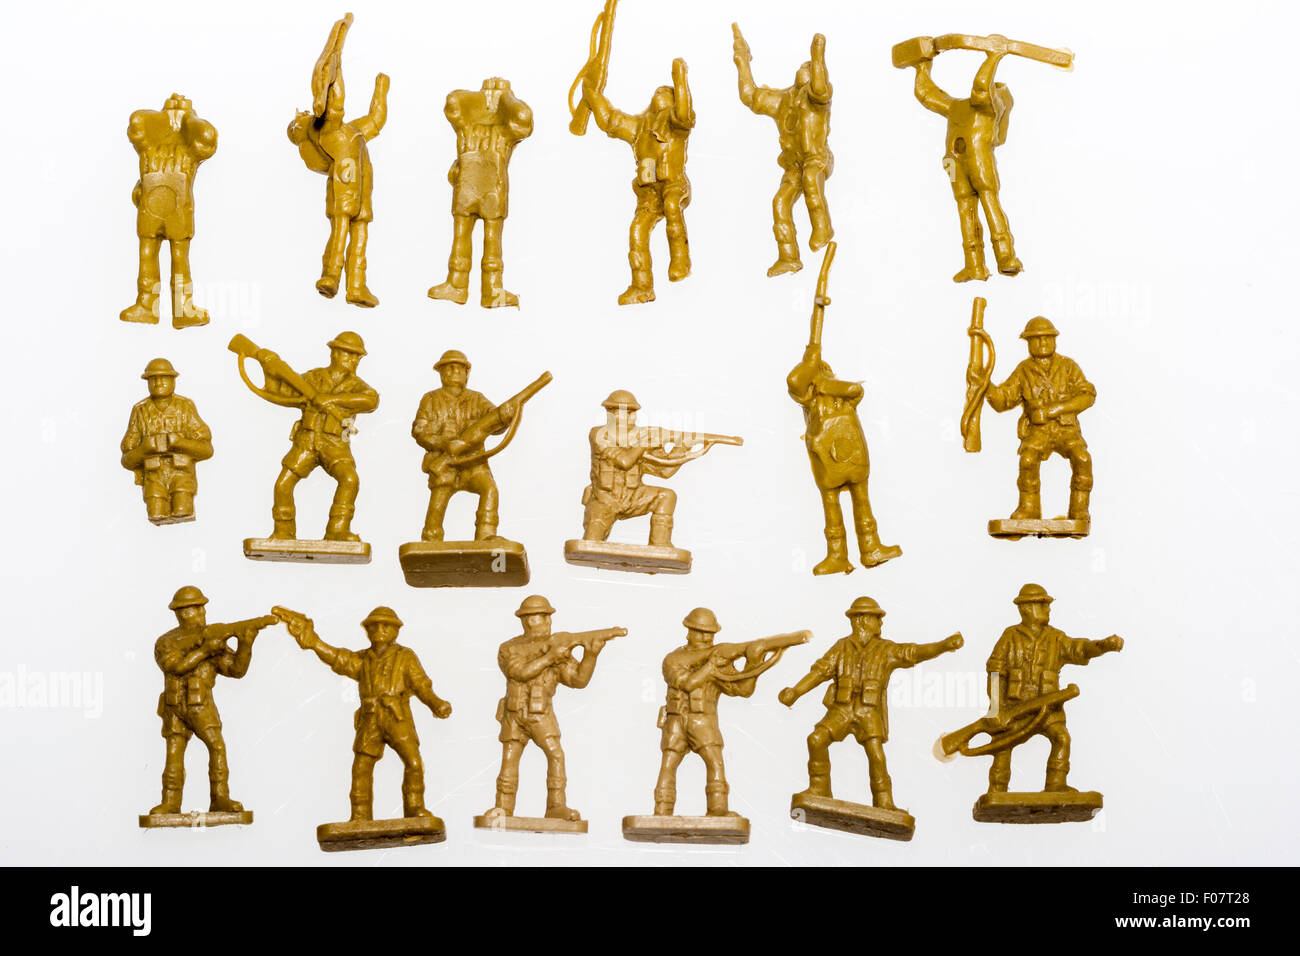 Airfix, HO/OO, 1/72 scale plastic model figures. World War Two, 8th army. Three rows of soldiers on plain white background. 1960 original set. Stock Photo